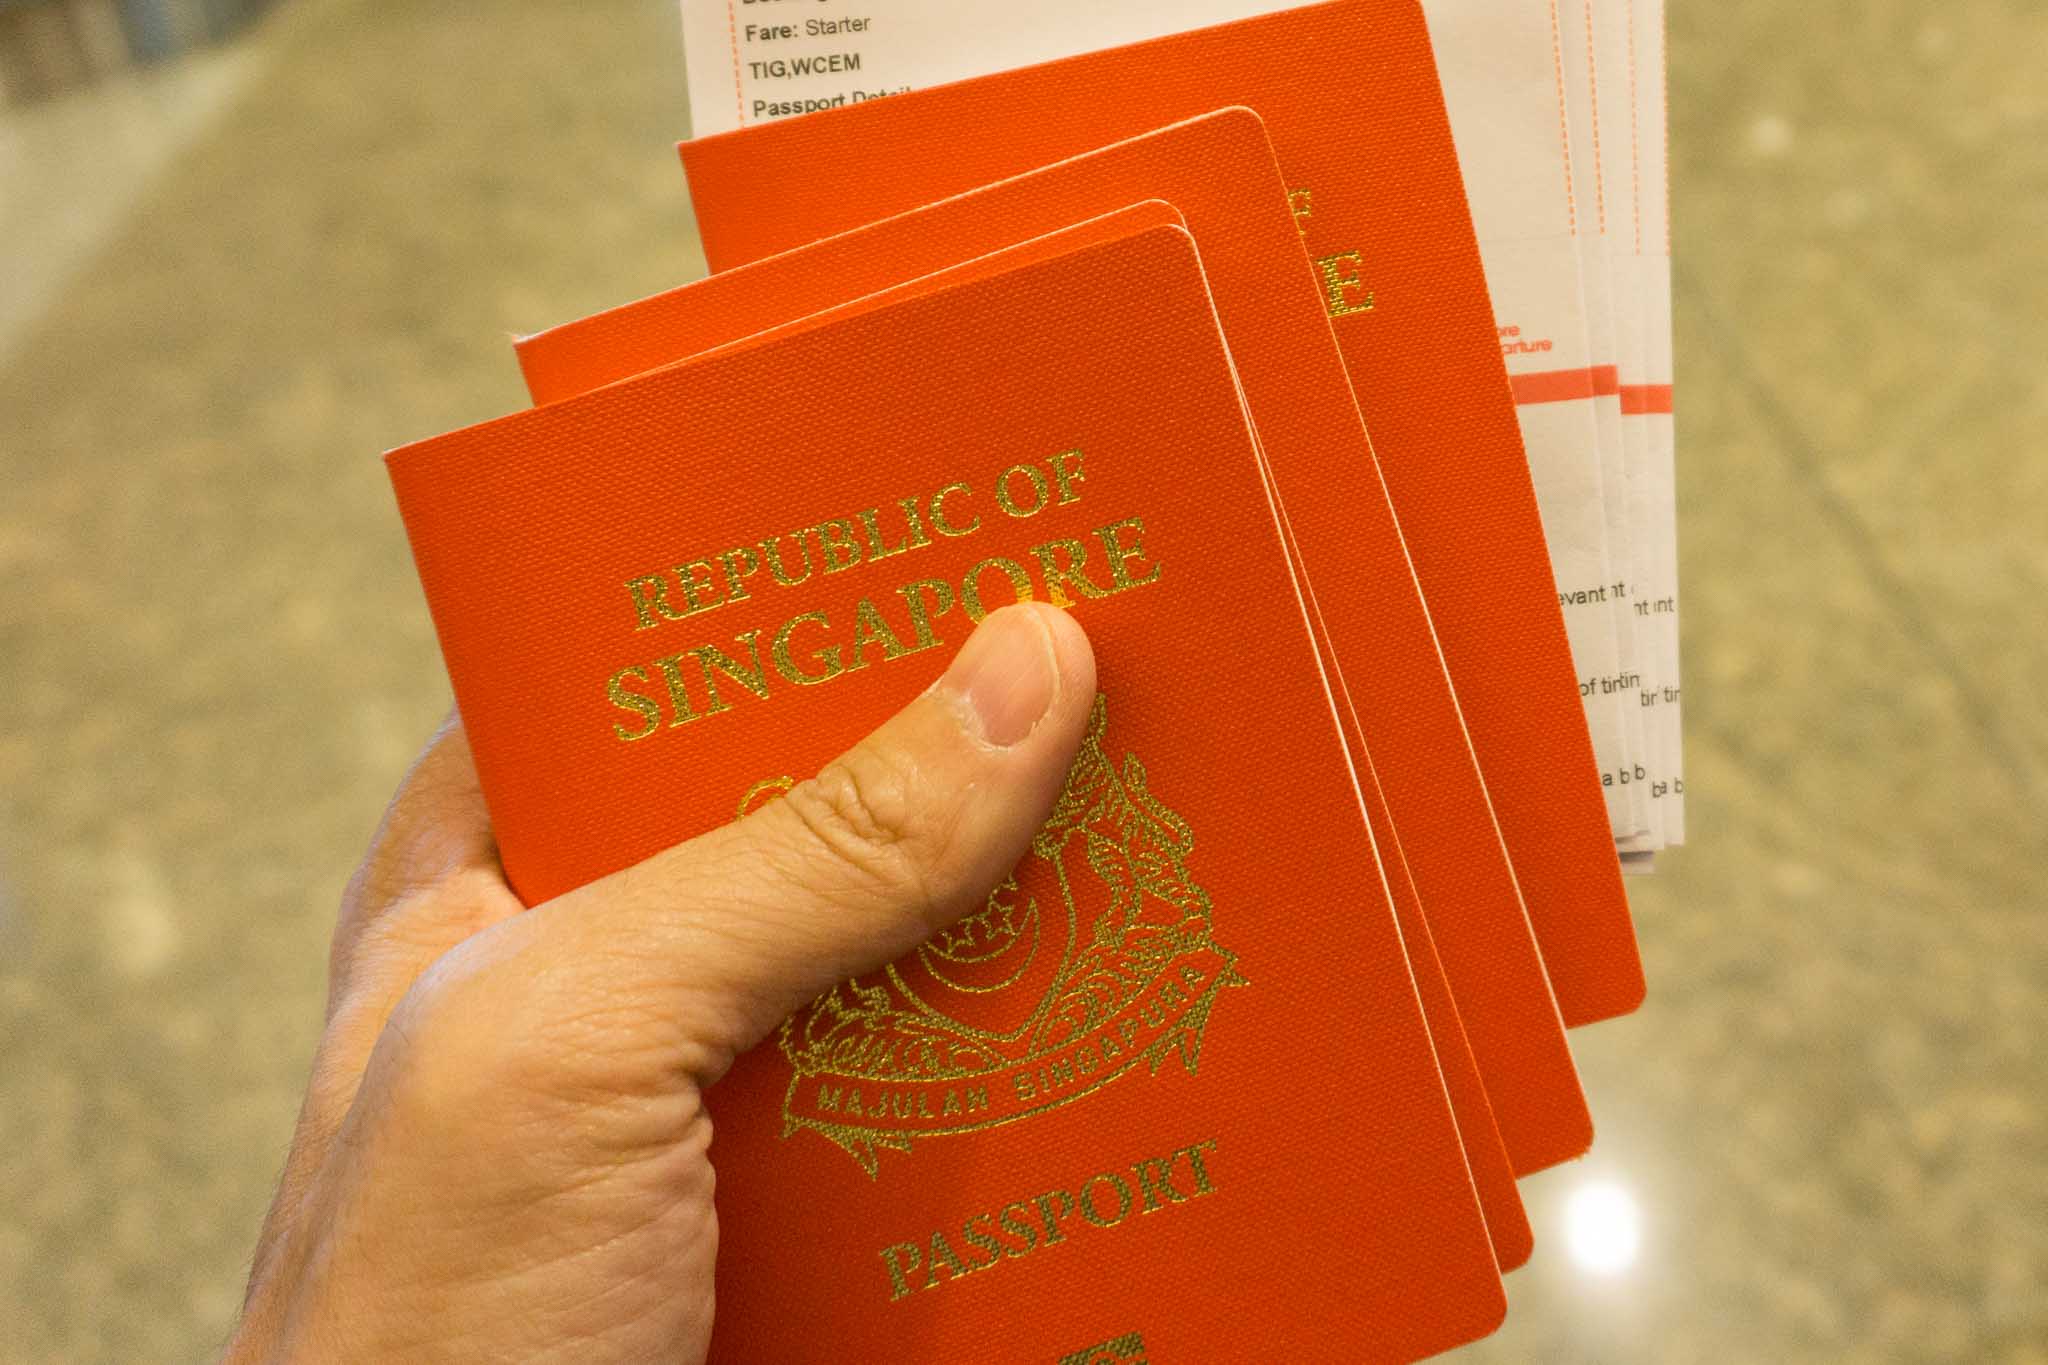 Singapore's Passport Was Just Ranked the Most Powerful in the World